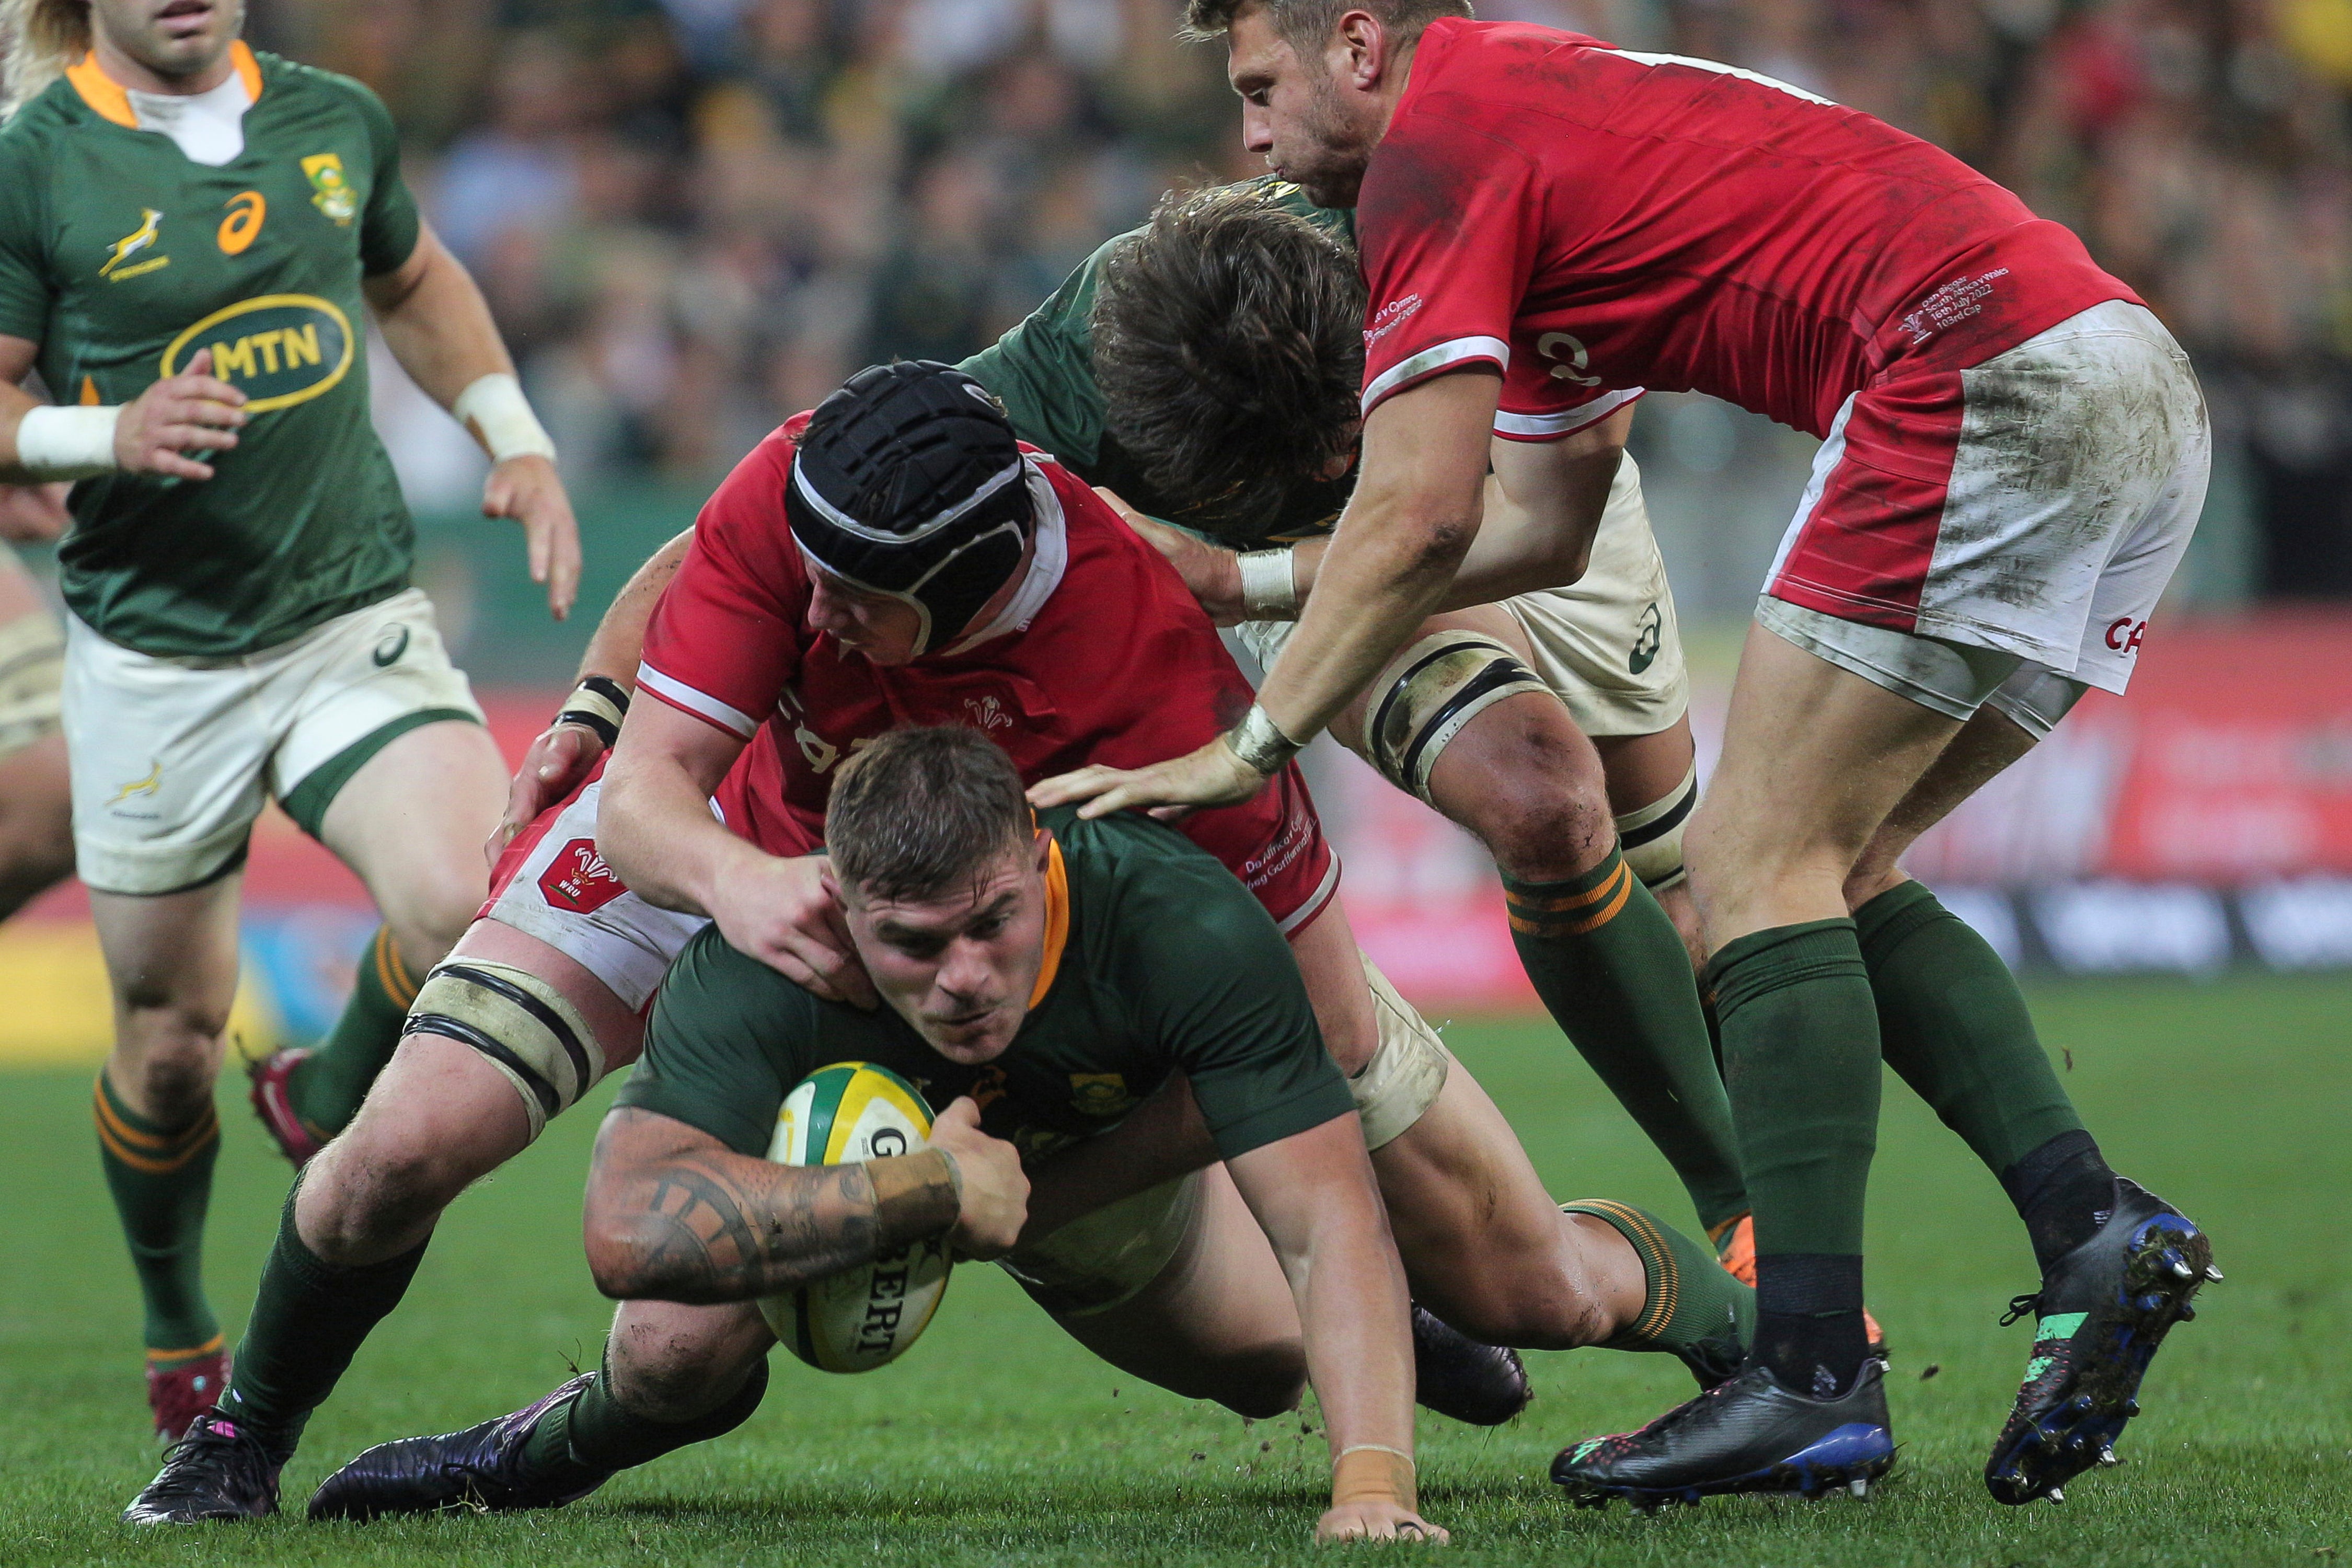 Wales’ hopes of a series win in South Africa were dashed as they lost 30-14 in Cape Town in their series decider (Halden Krog/AP)